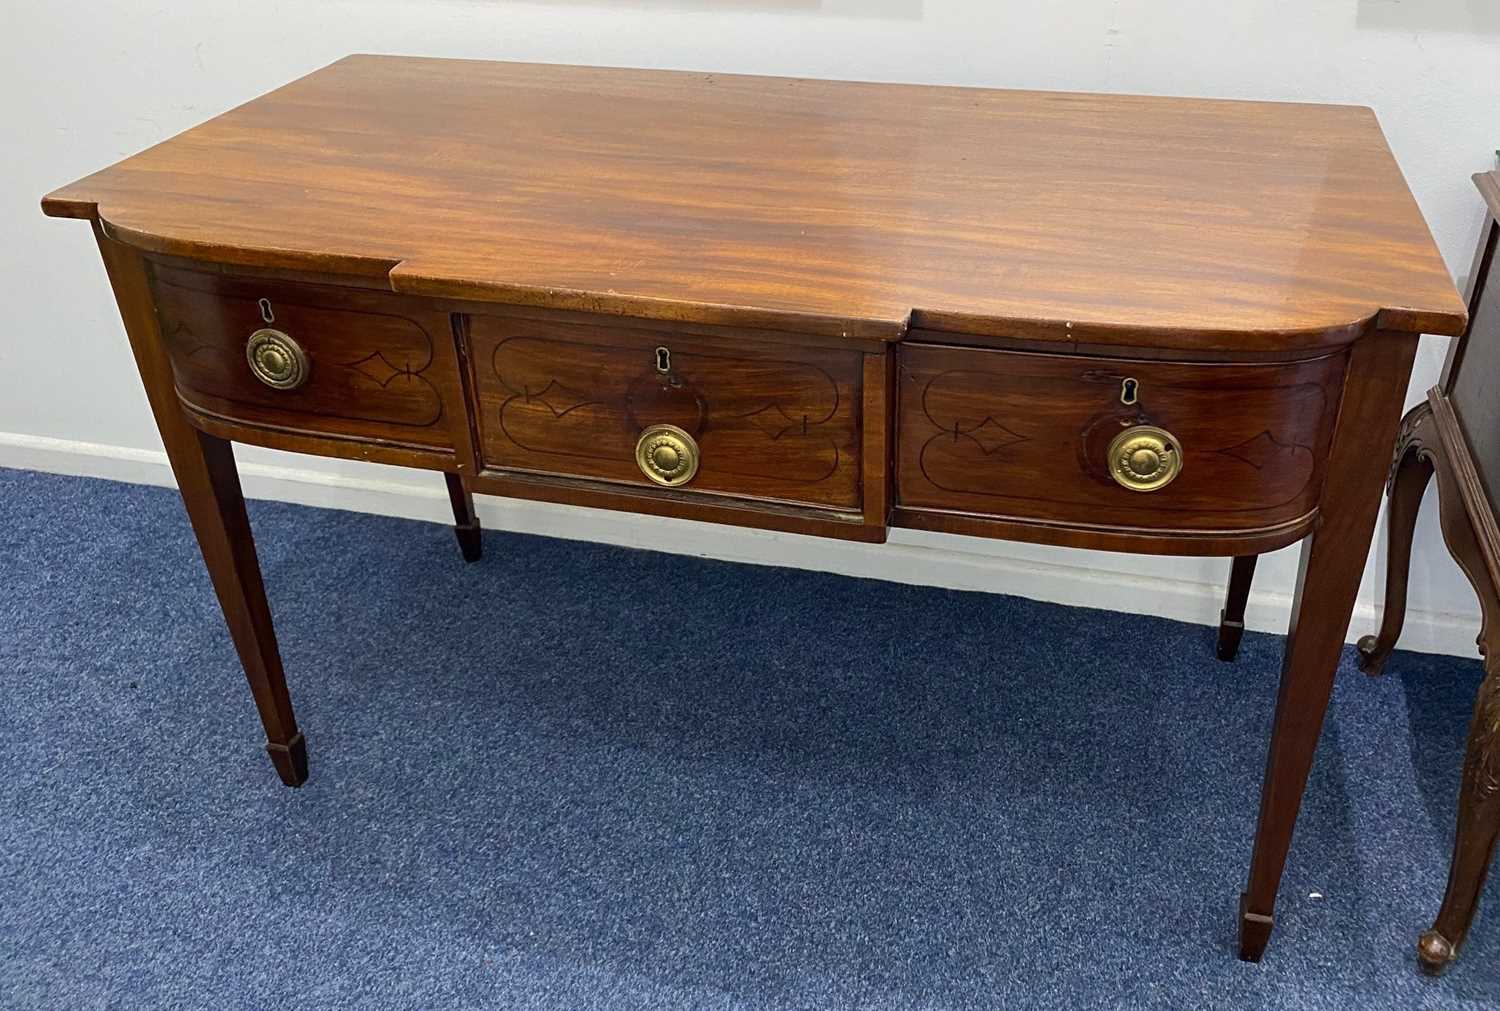 A Sheraton style mahogany breakfront side table, with an arrangement of three drawers on square